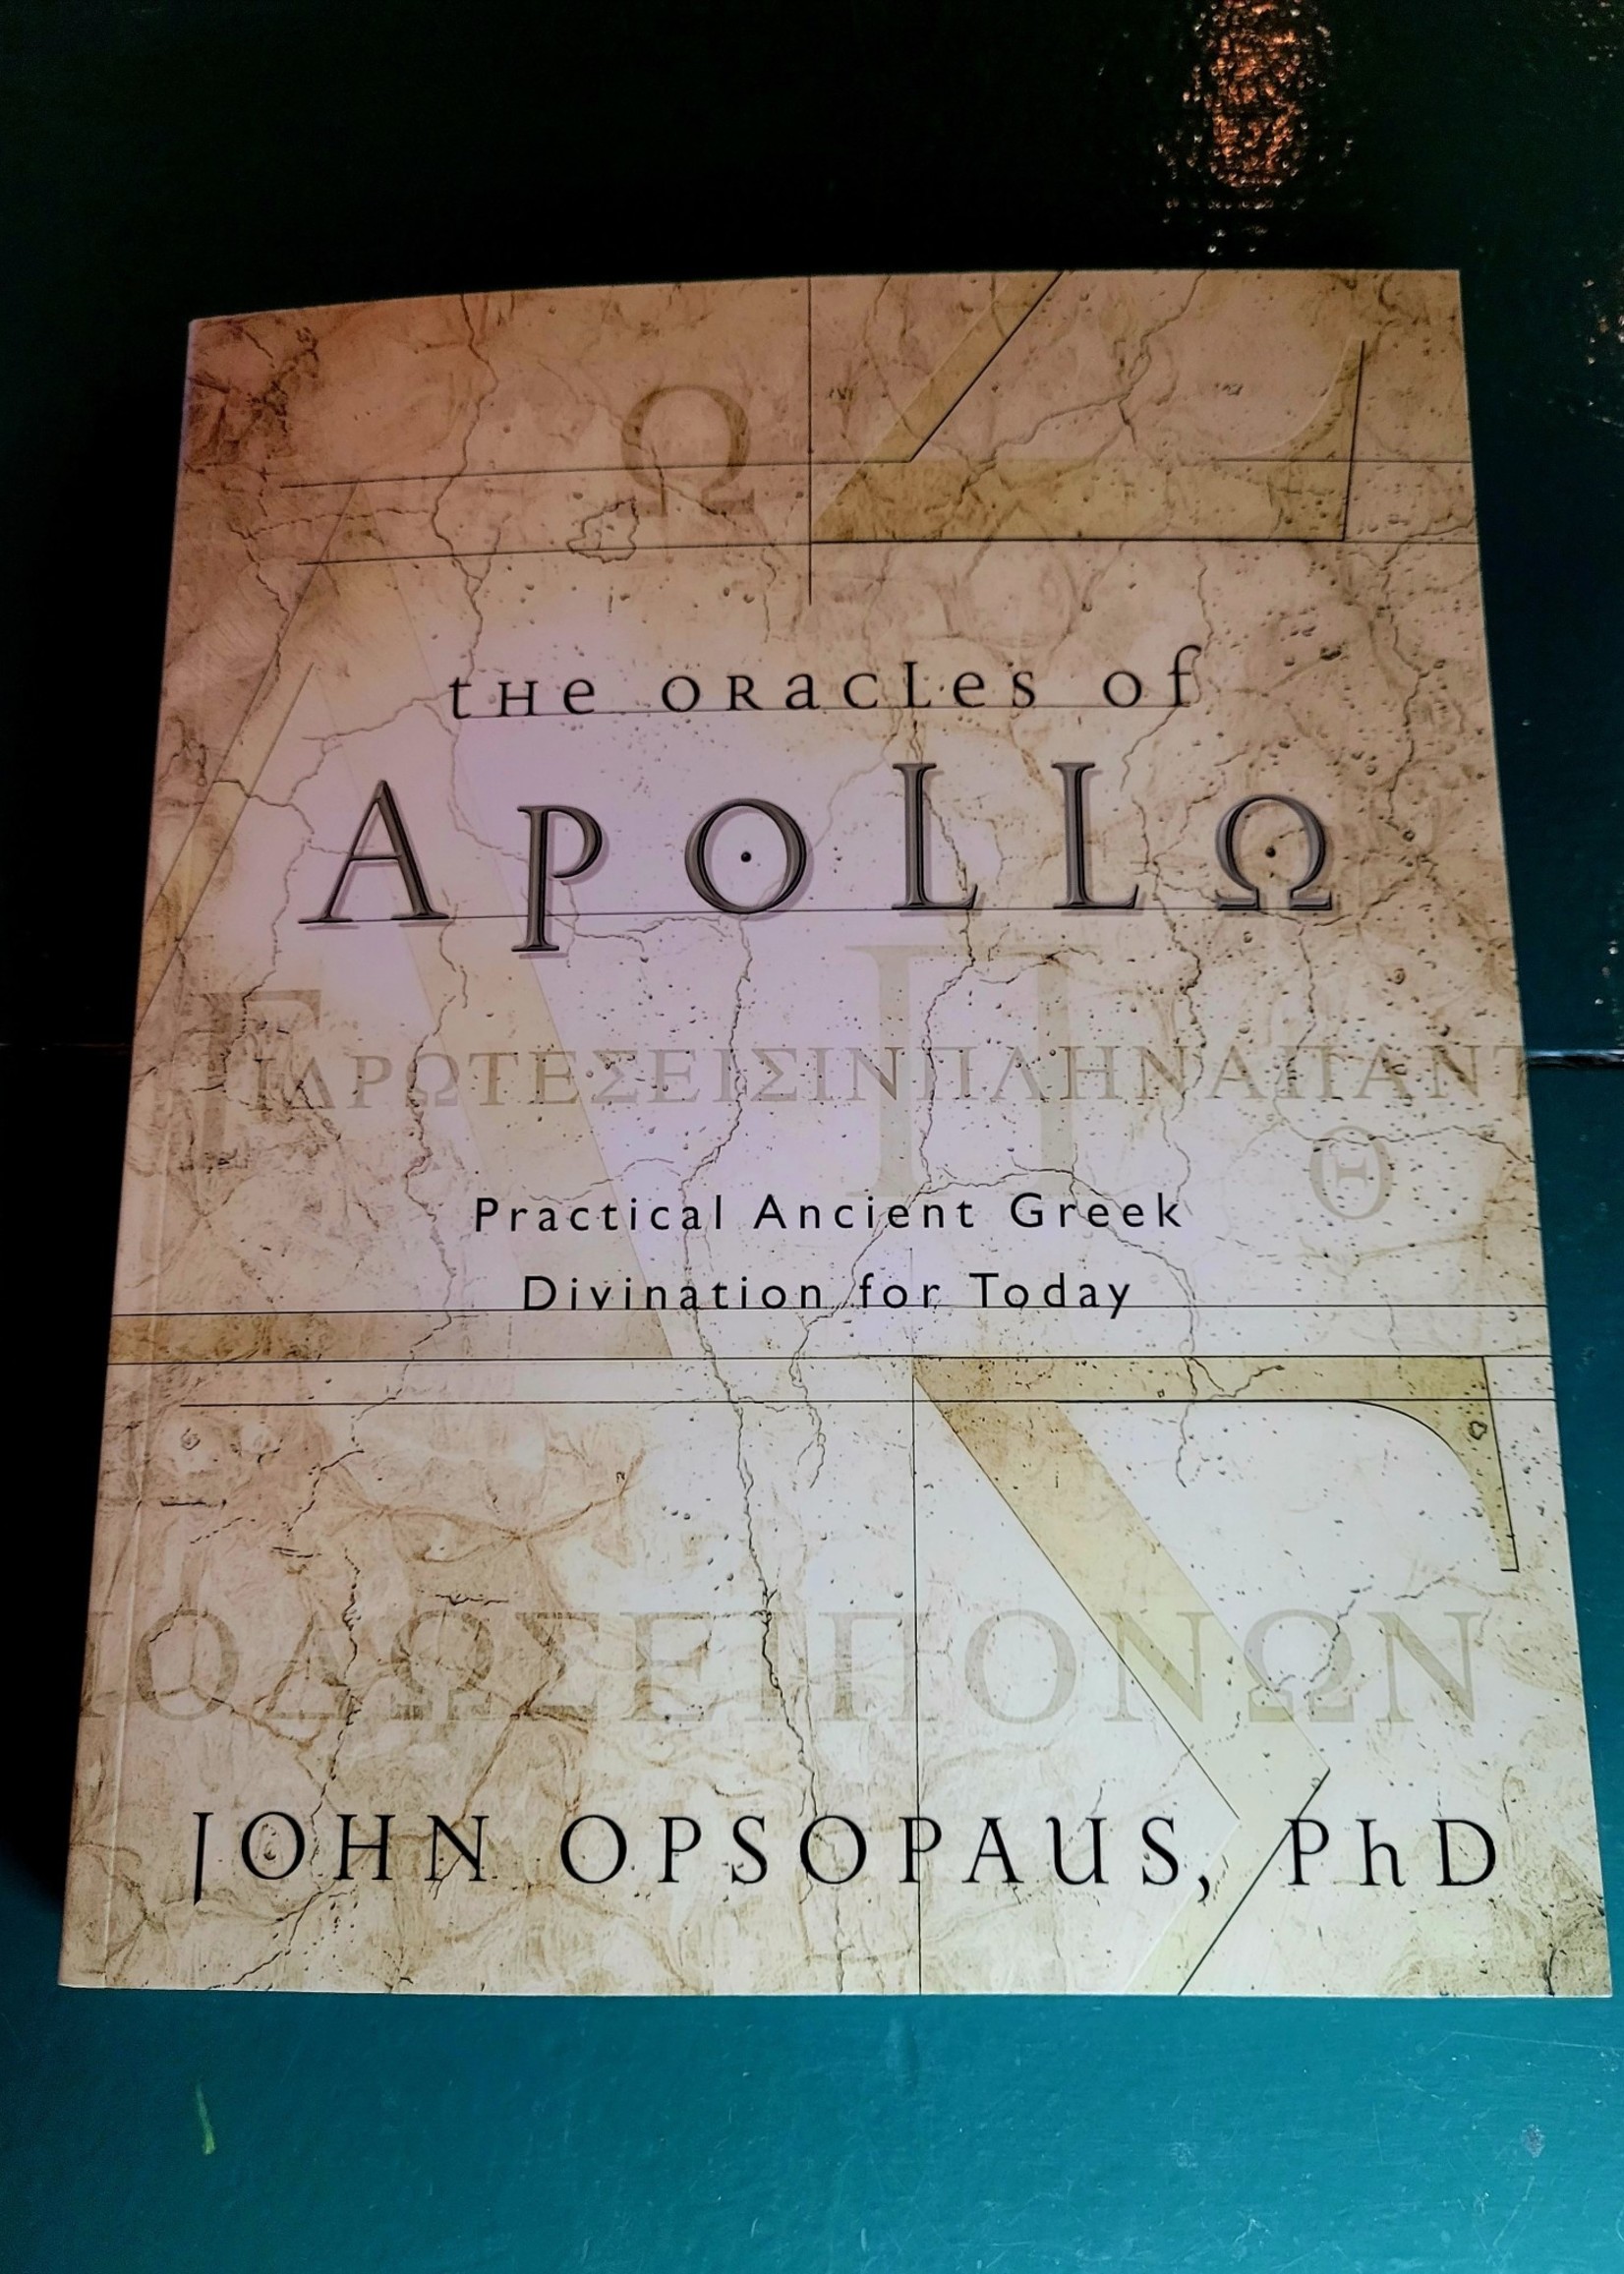 The Oracles of Apollo - BY JOHN OPSOPAUS PHD